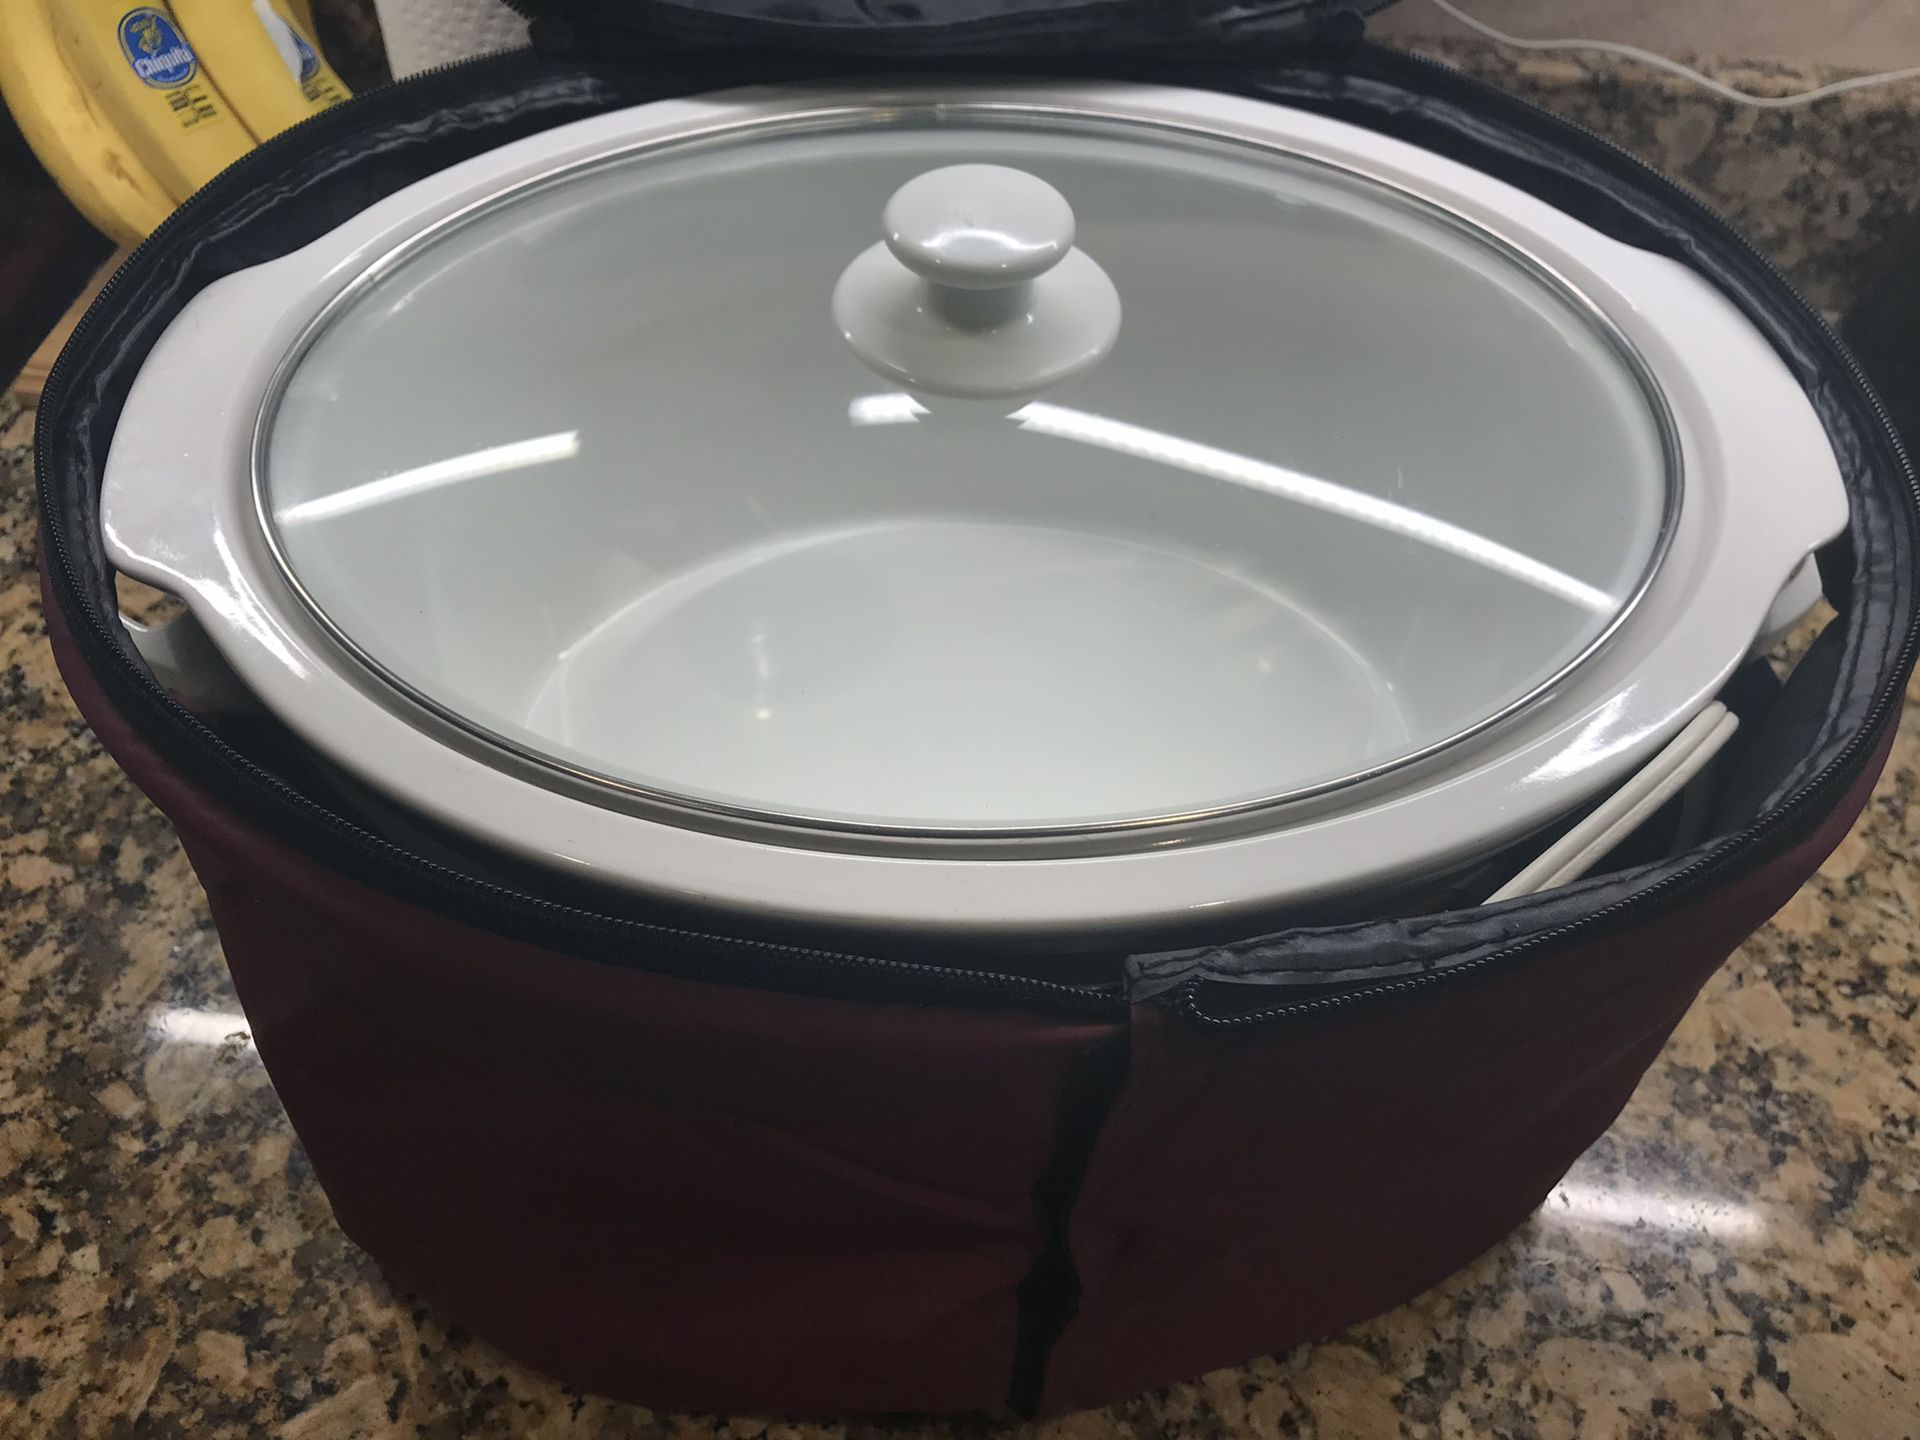 Hamilton beach slow cooker with keep temperature bag